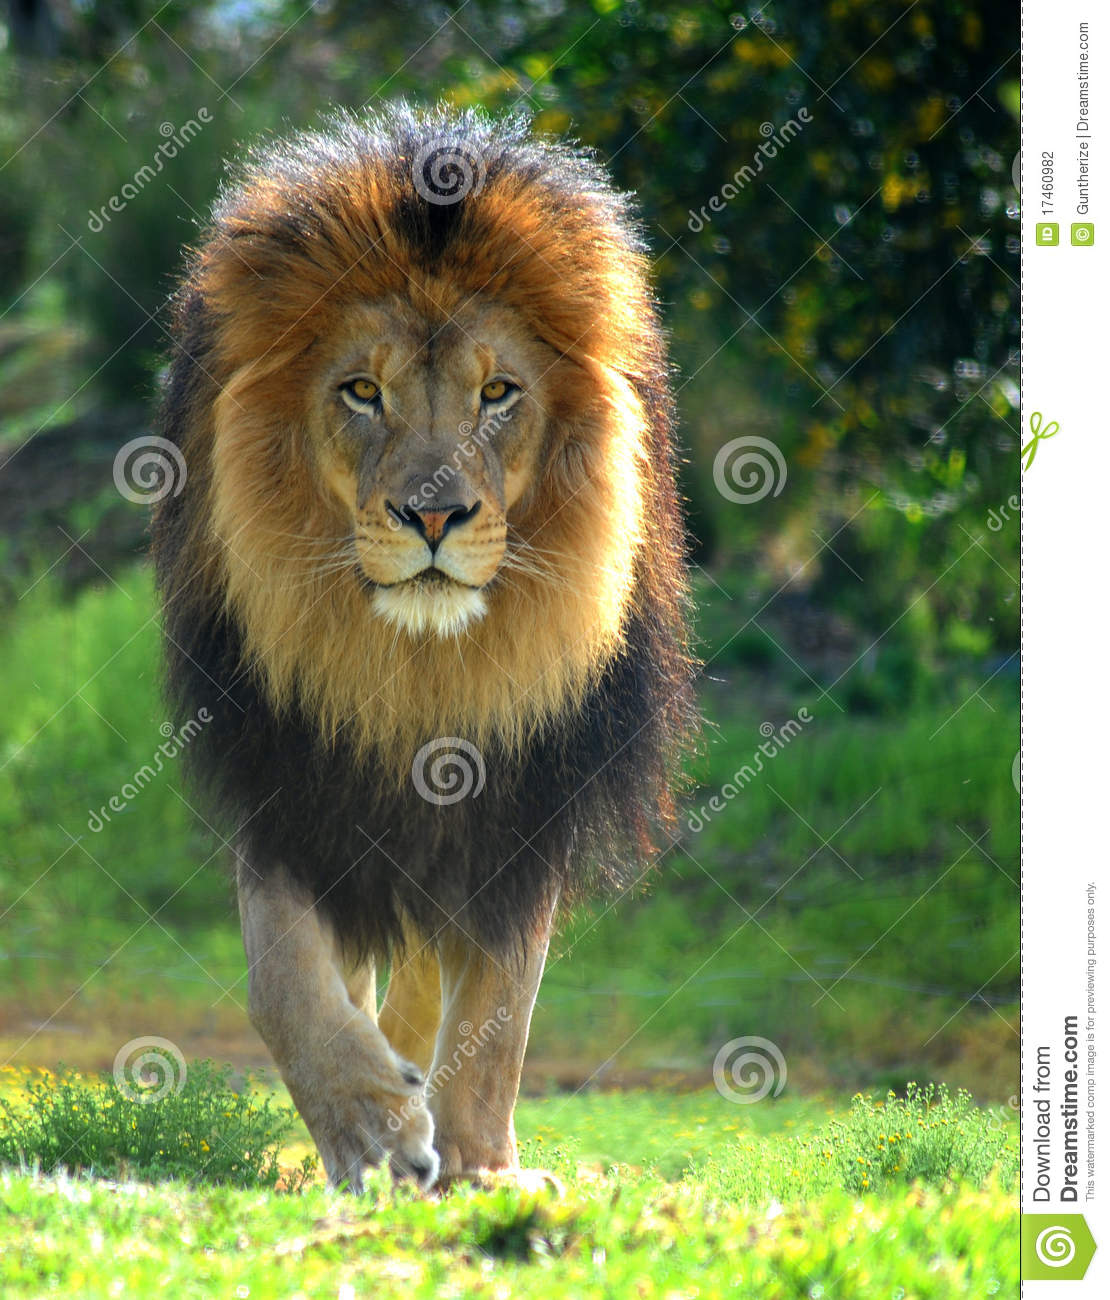 Lion walk stock photo image of african claws malelion